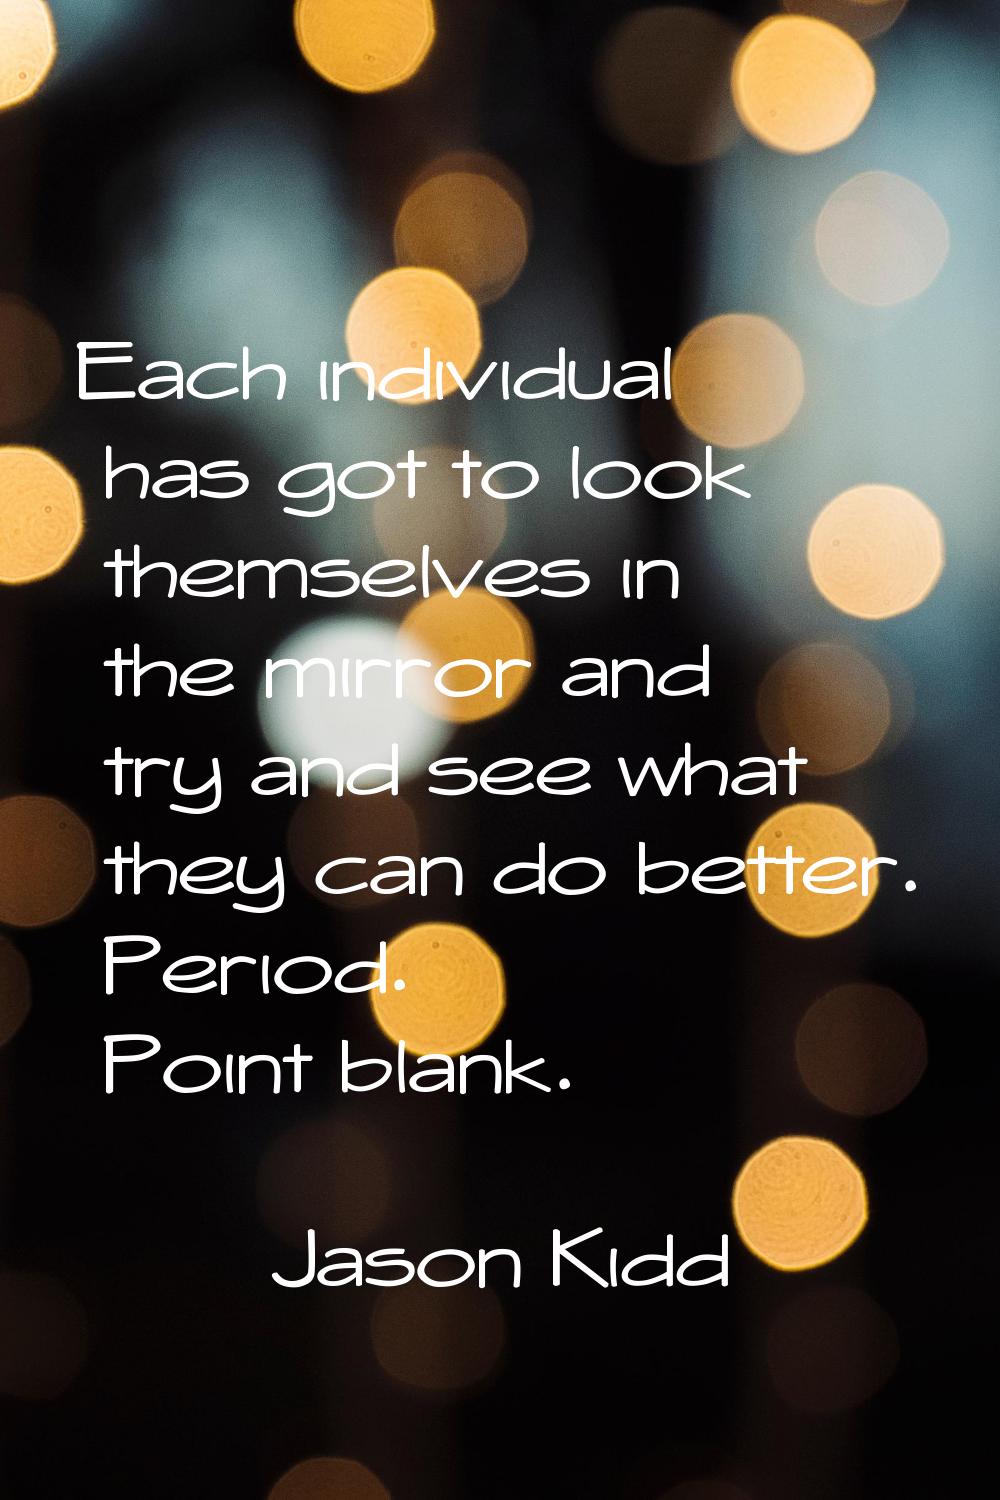 Each individual has got to look themselves in the mirror and try and see what they can do better. P